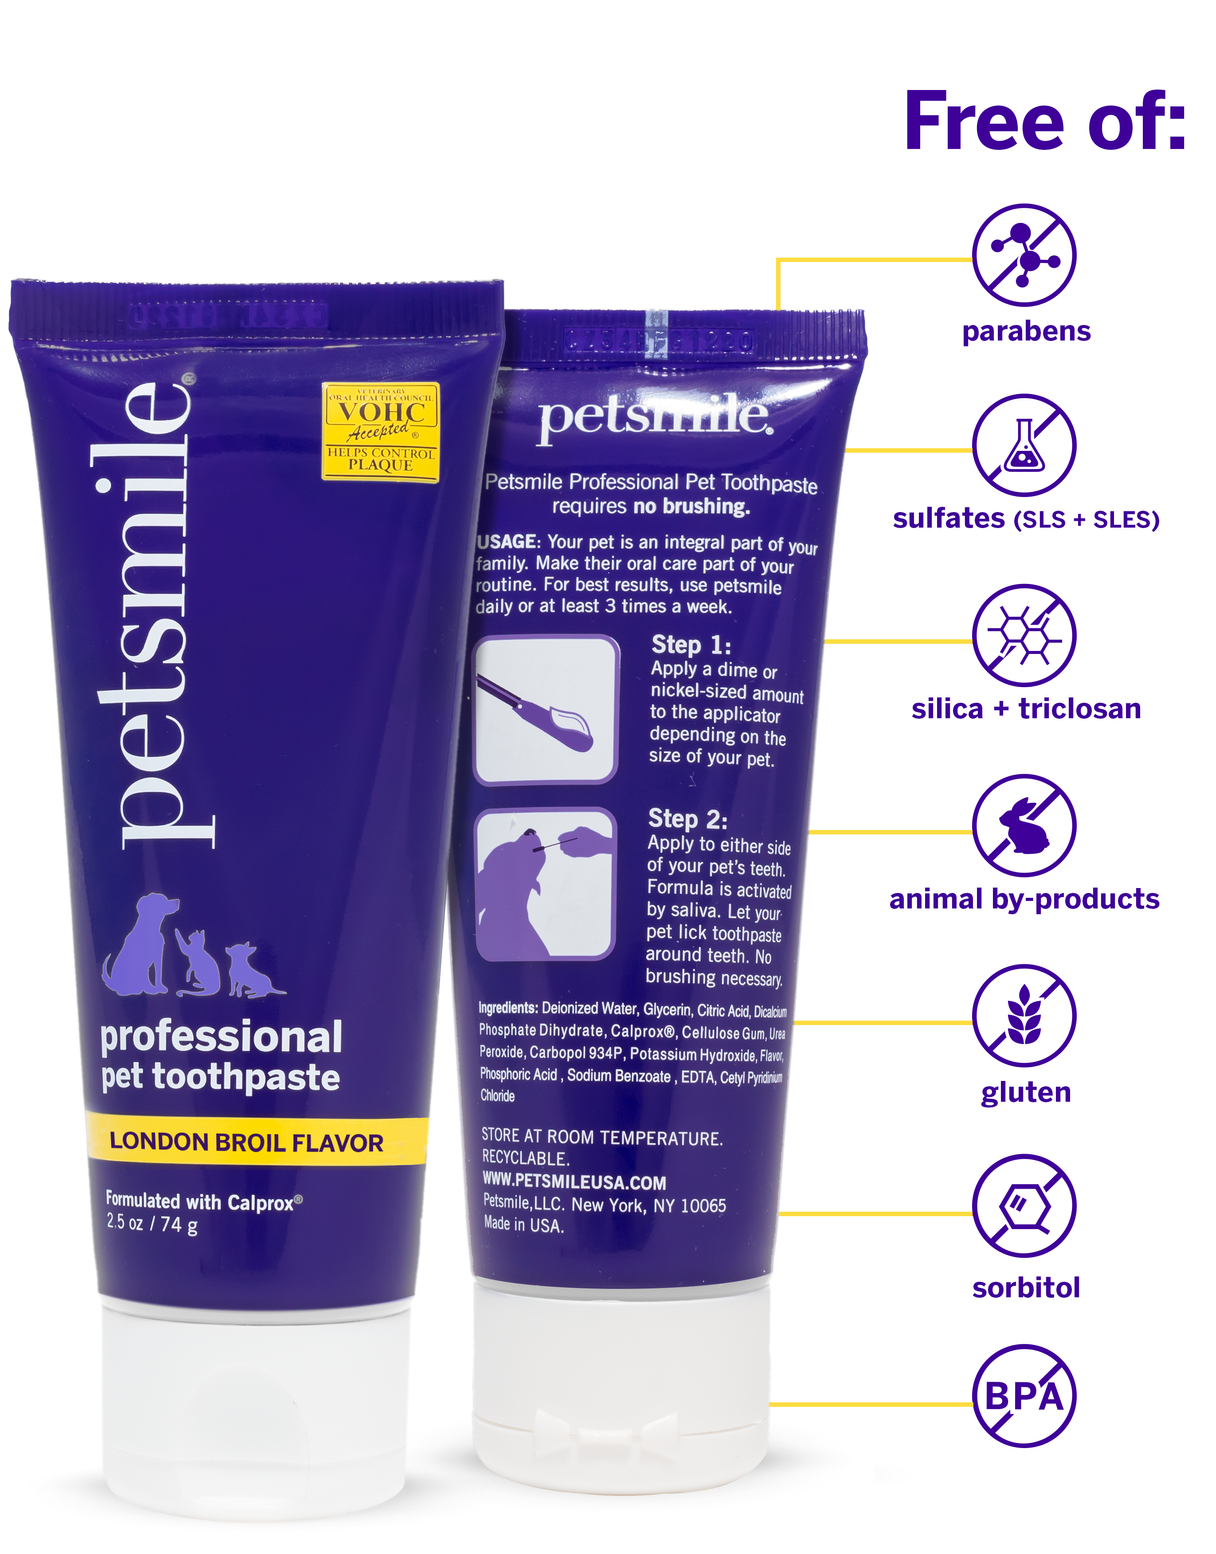 Petsmile Professional Dog Toothpaste  Only Toothpaste accepted by Veterinary Oral Health Council (VOHC) LONDON BROIL